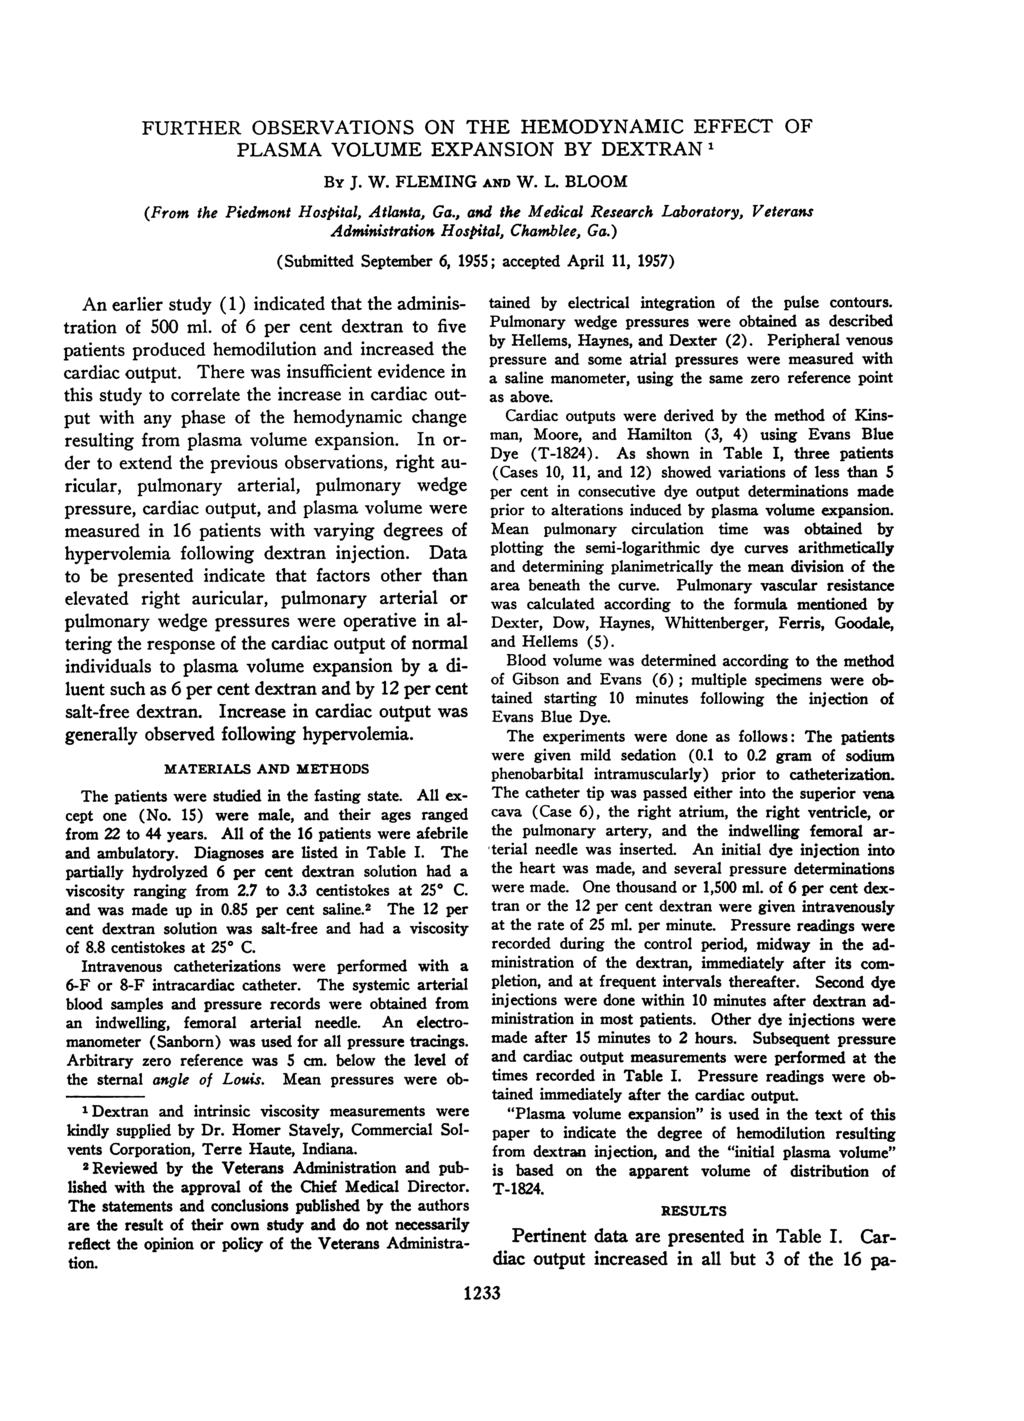 FURTHER OBSERVATONS ON THE HEMODYNAMC EFFECT OF PLASMA VOLUME EXPANSON BY DEXTRAN1 By J. W. FLEMNG AND W. L. BLOOM (From the Piedmont Hospital, Atlanta, Ga.